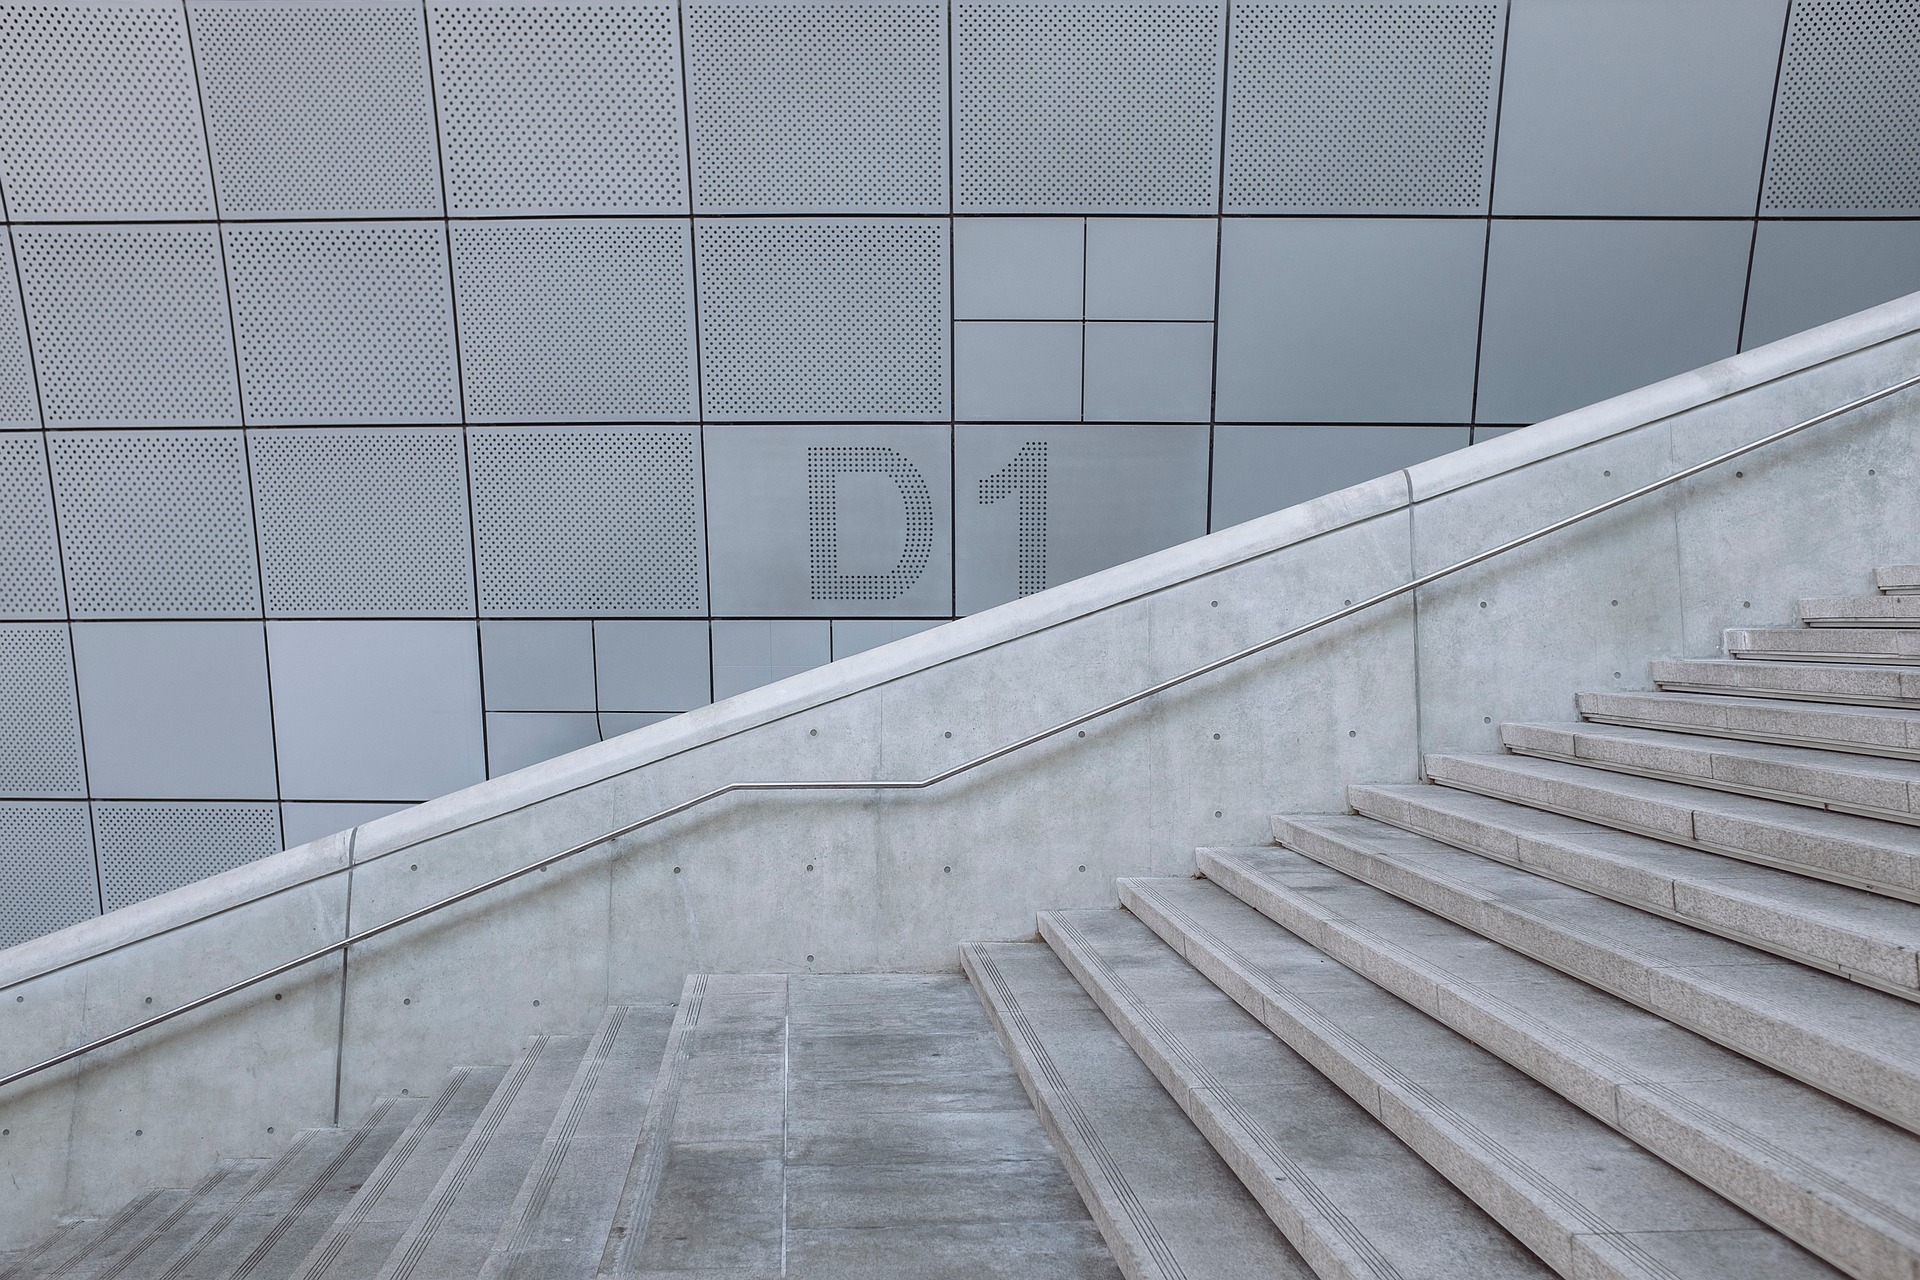 Stairs in the City, Architecture, City, Construction, Stair, HQ Photo